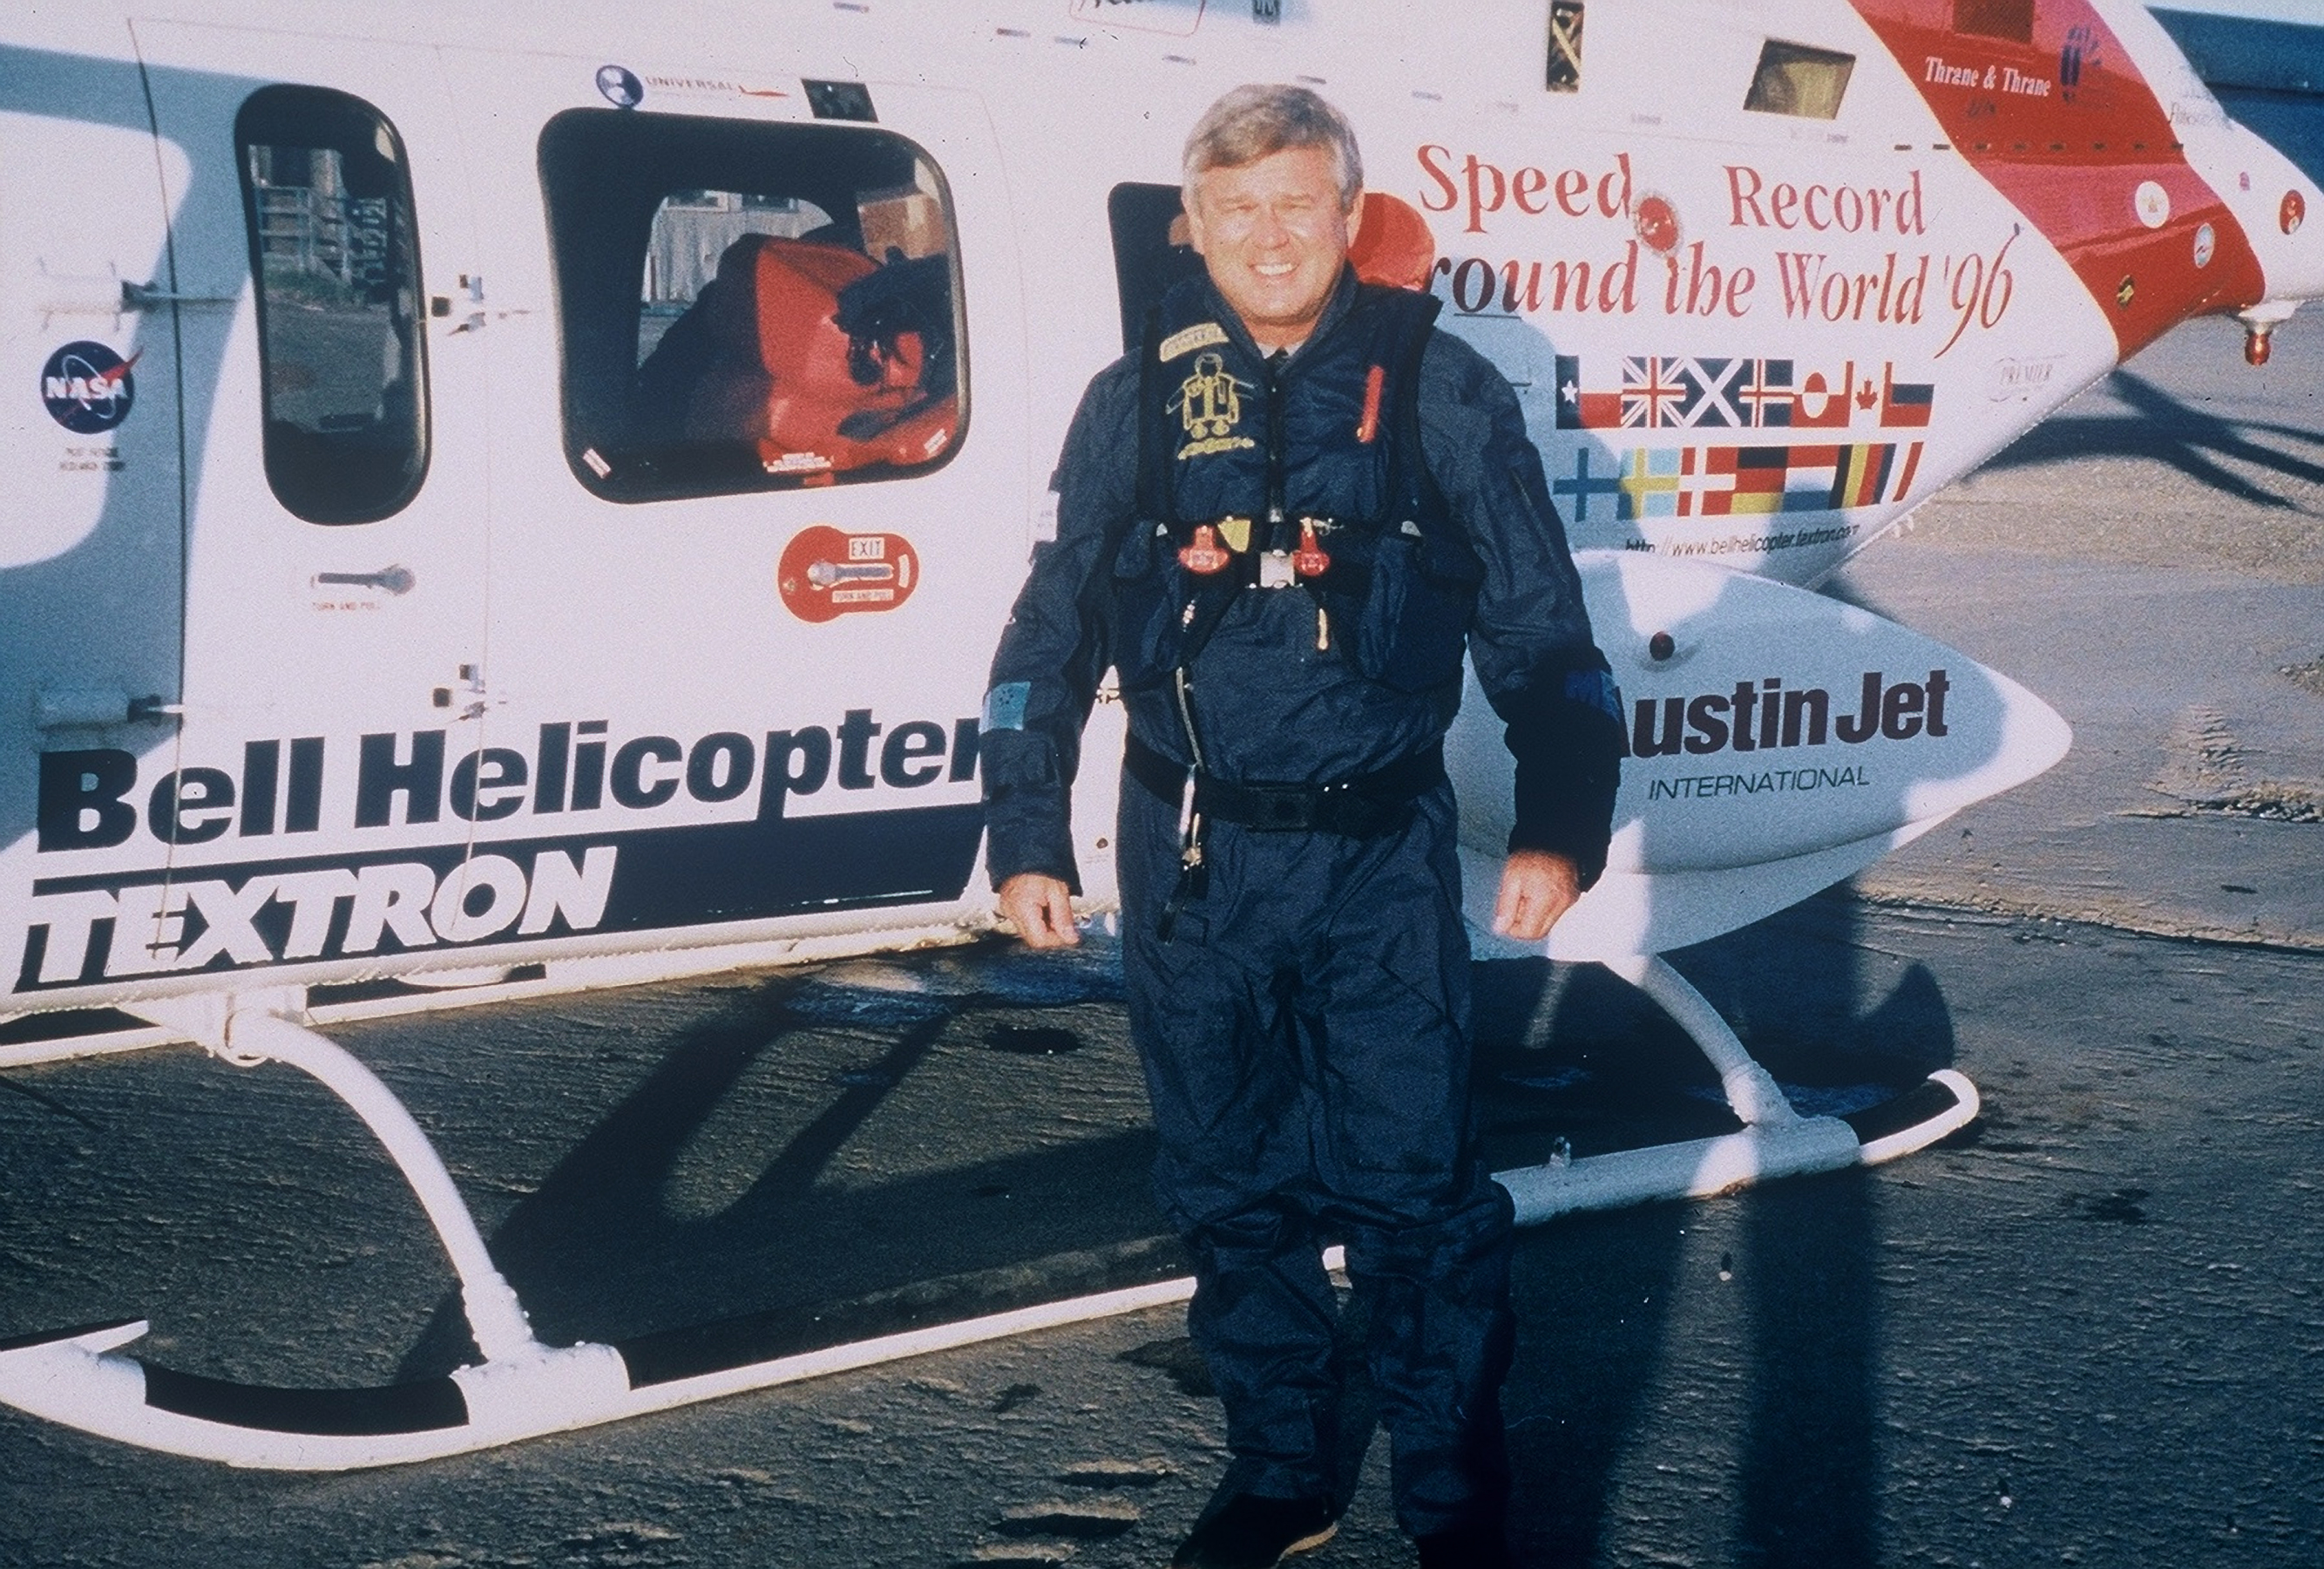 is a lifetime member of the Society of Experimental Test Pilots and was president of the Helicopter Club of America.